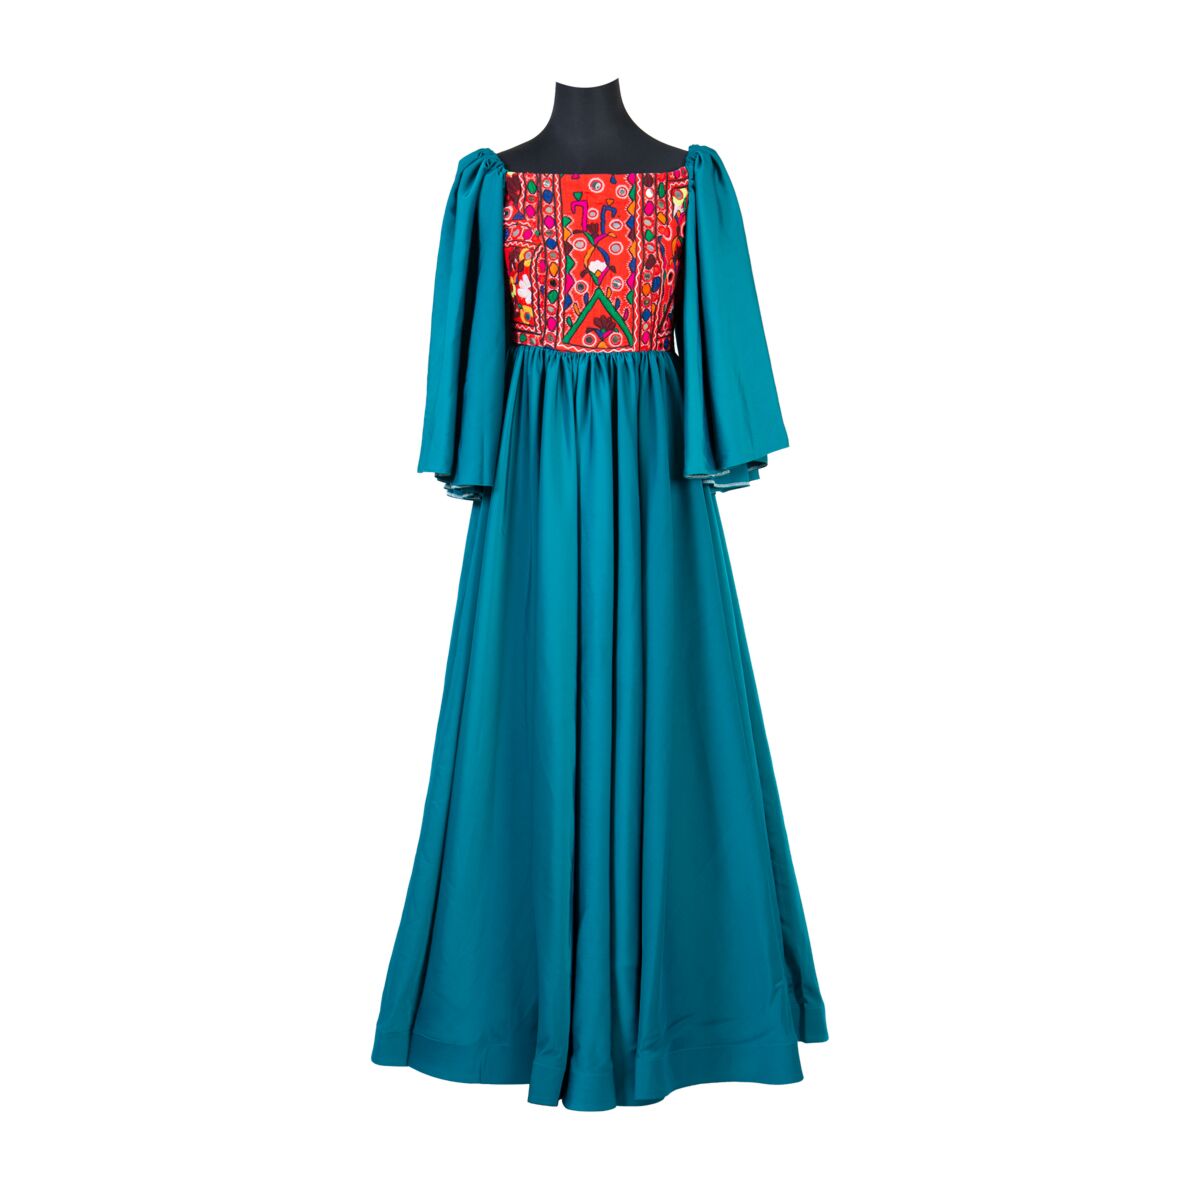 Handmade Embroidered Dress | Long Maxi Dress With Flared Sleeves